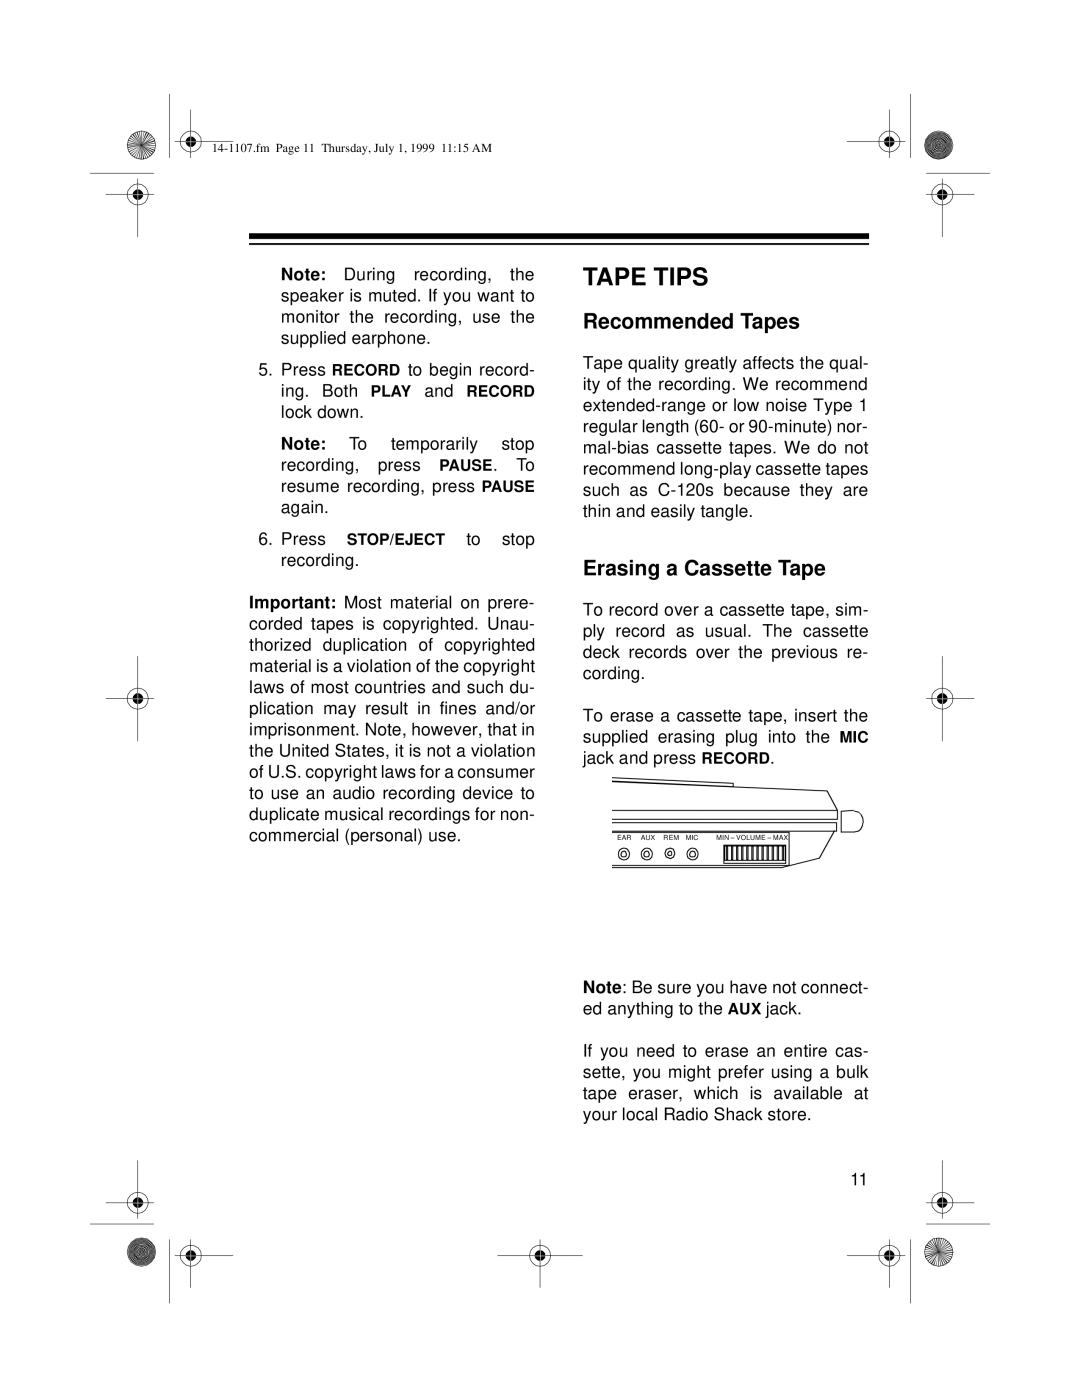 Radio Shack 14-1107A, CTR-94 owner manual Tape Tips, Recommended Tapes, Erasing a Cassette Tape 